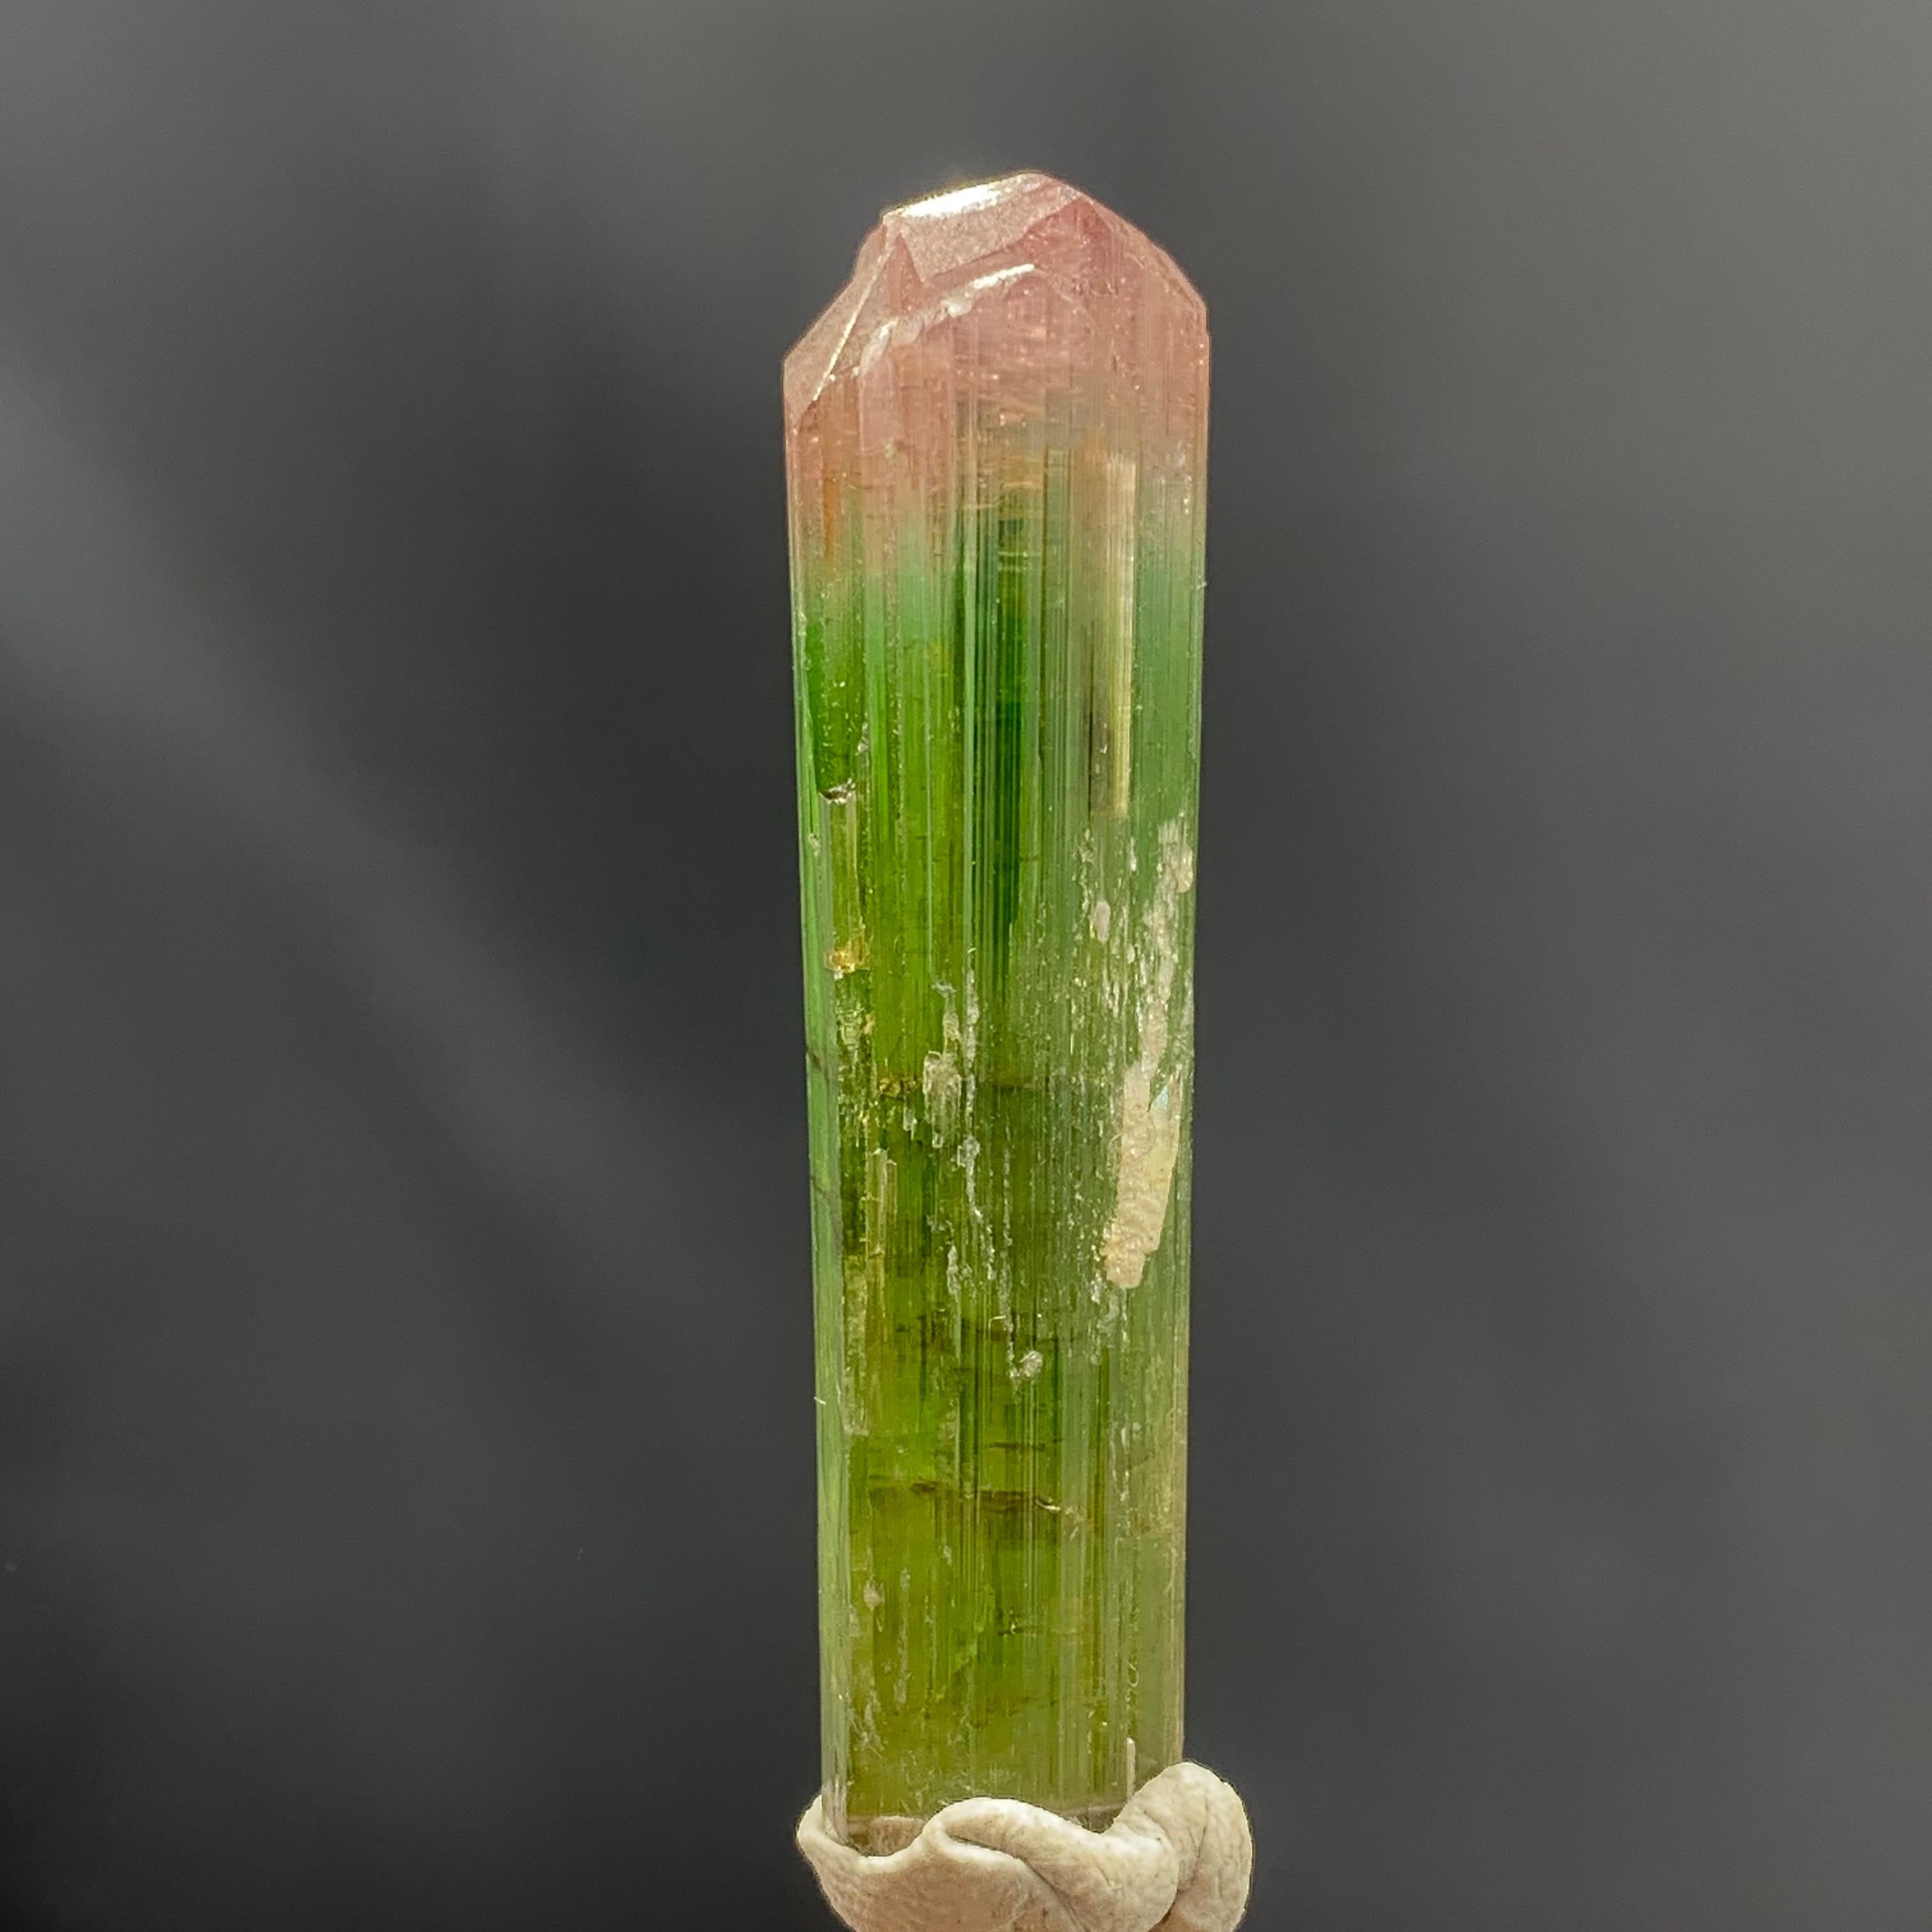 Glamorous Natural 69.75 Carat Bi Color Tourmaline Crystal From Afghanistan For Sale 2